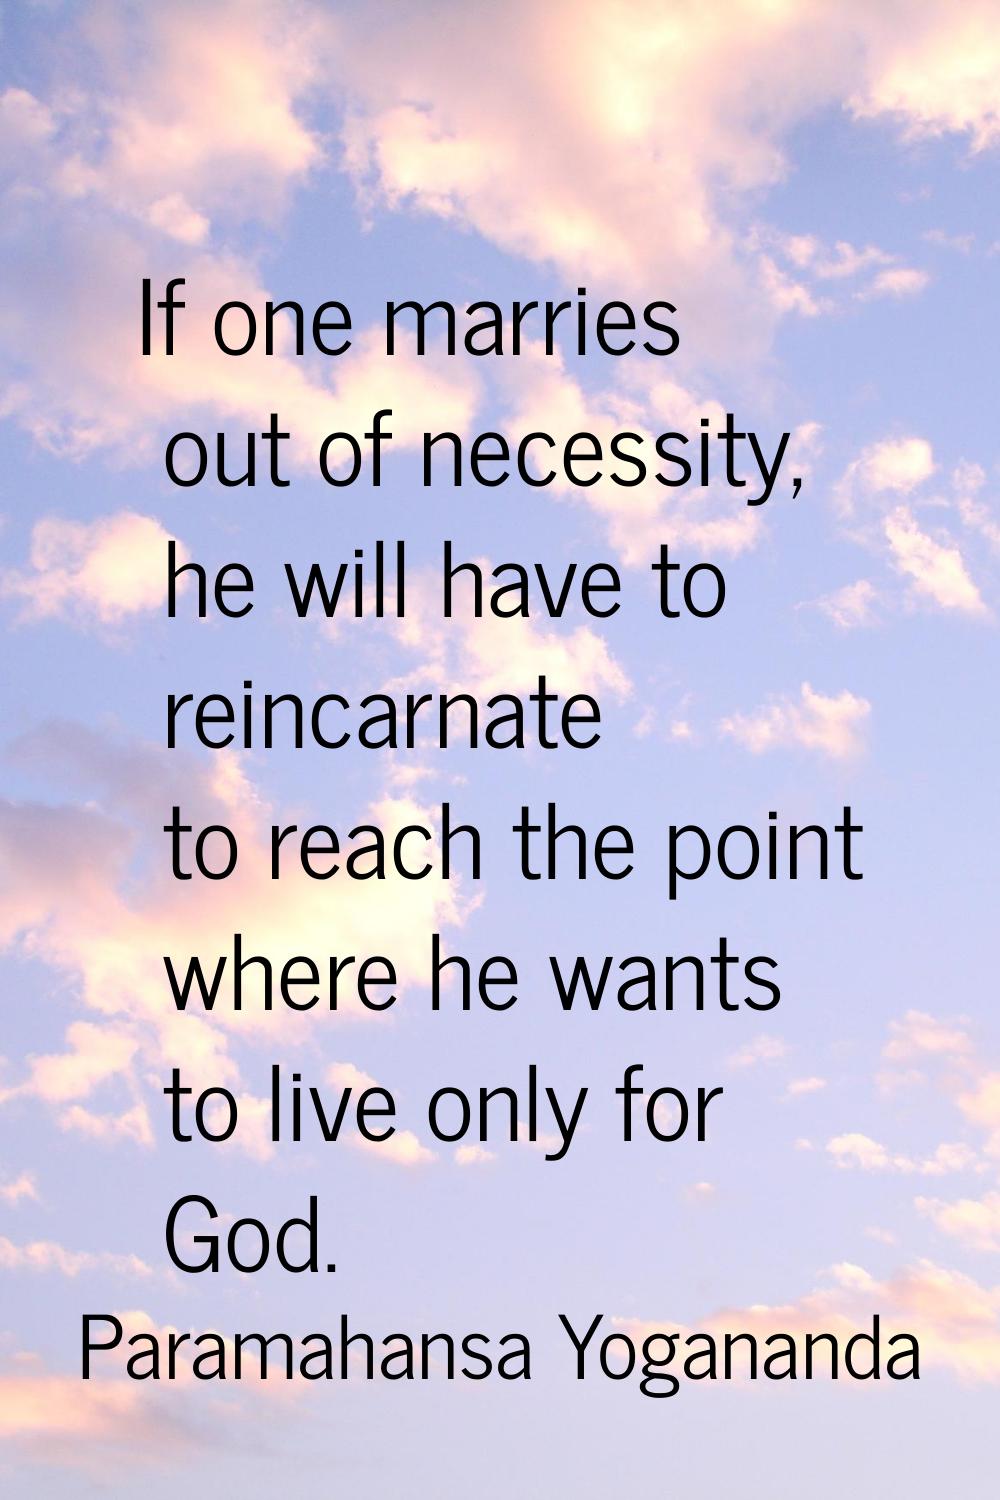 If one marries out of necessity, he will have to reincarnate to reach the point where he wants to l